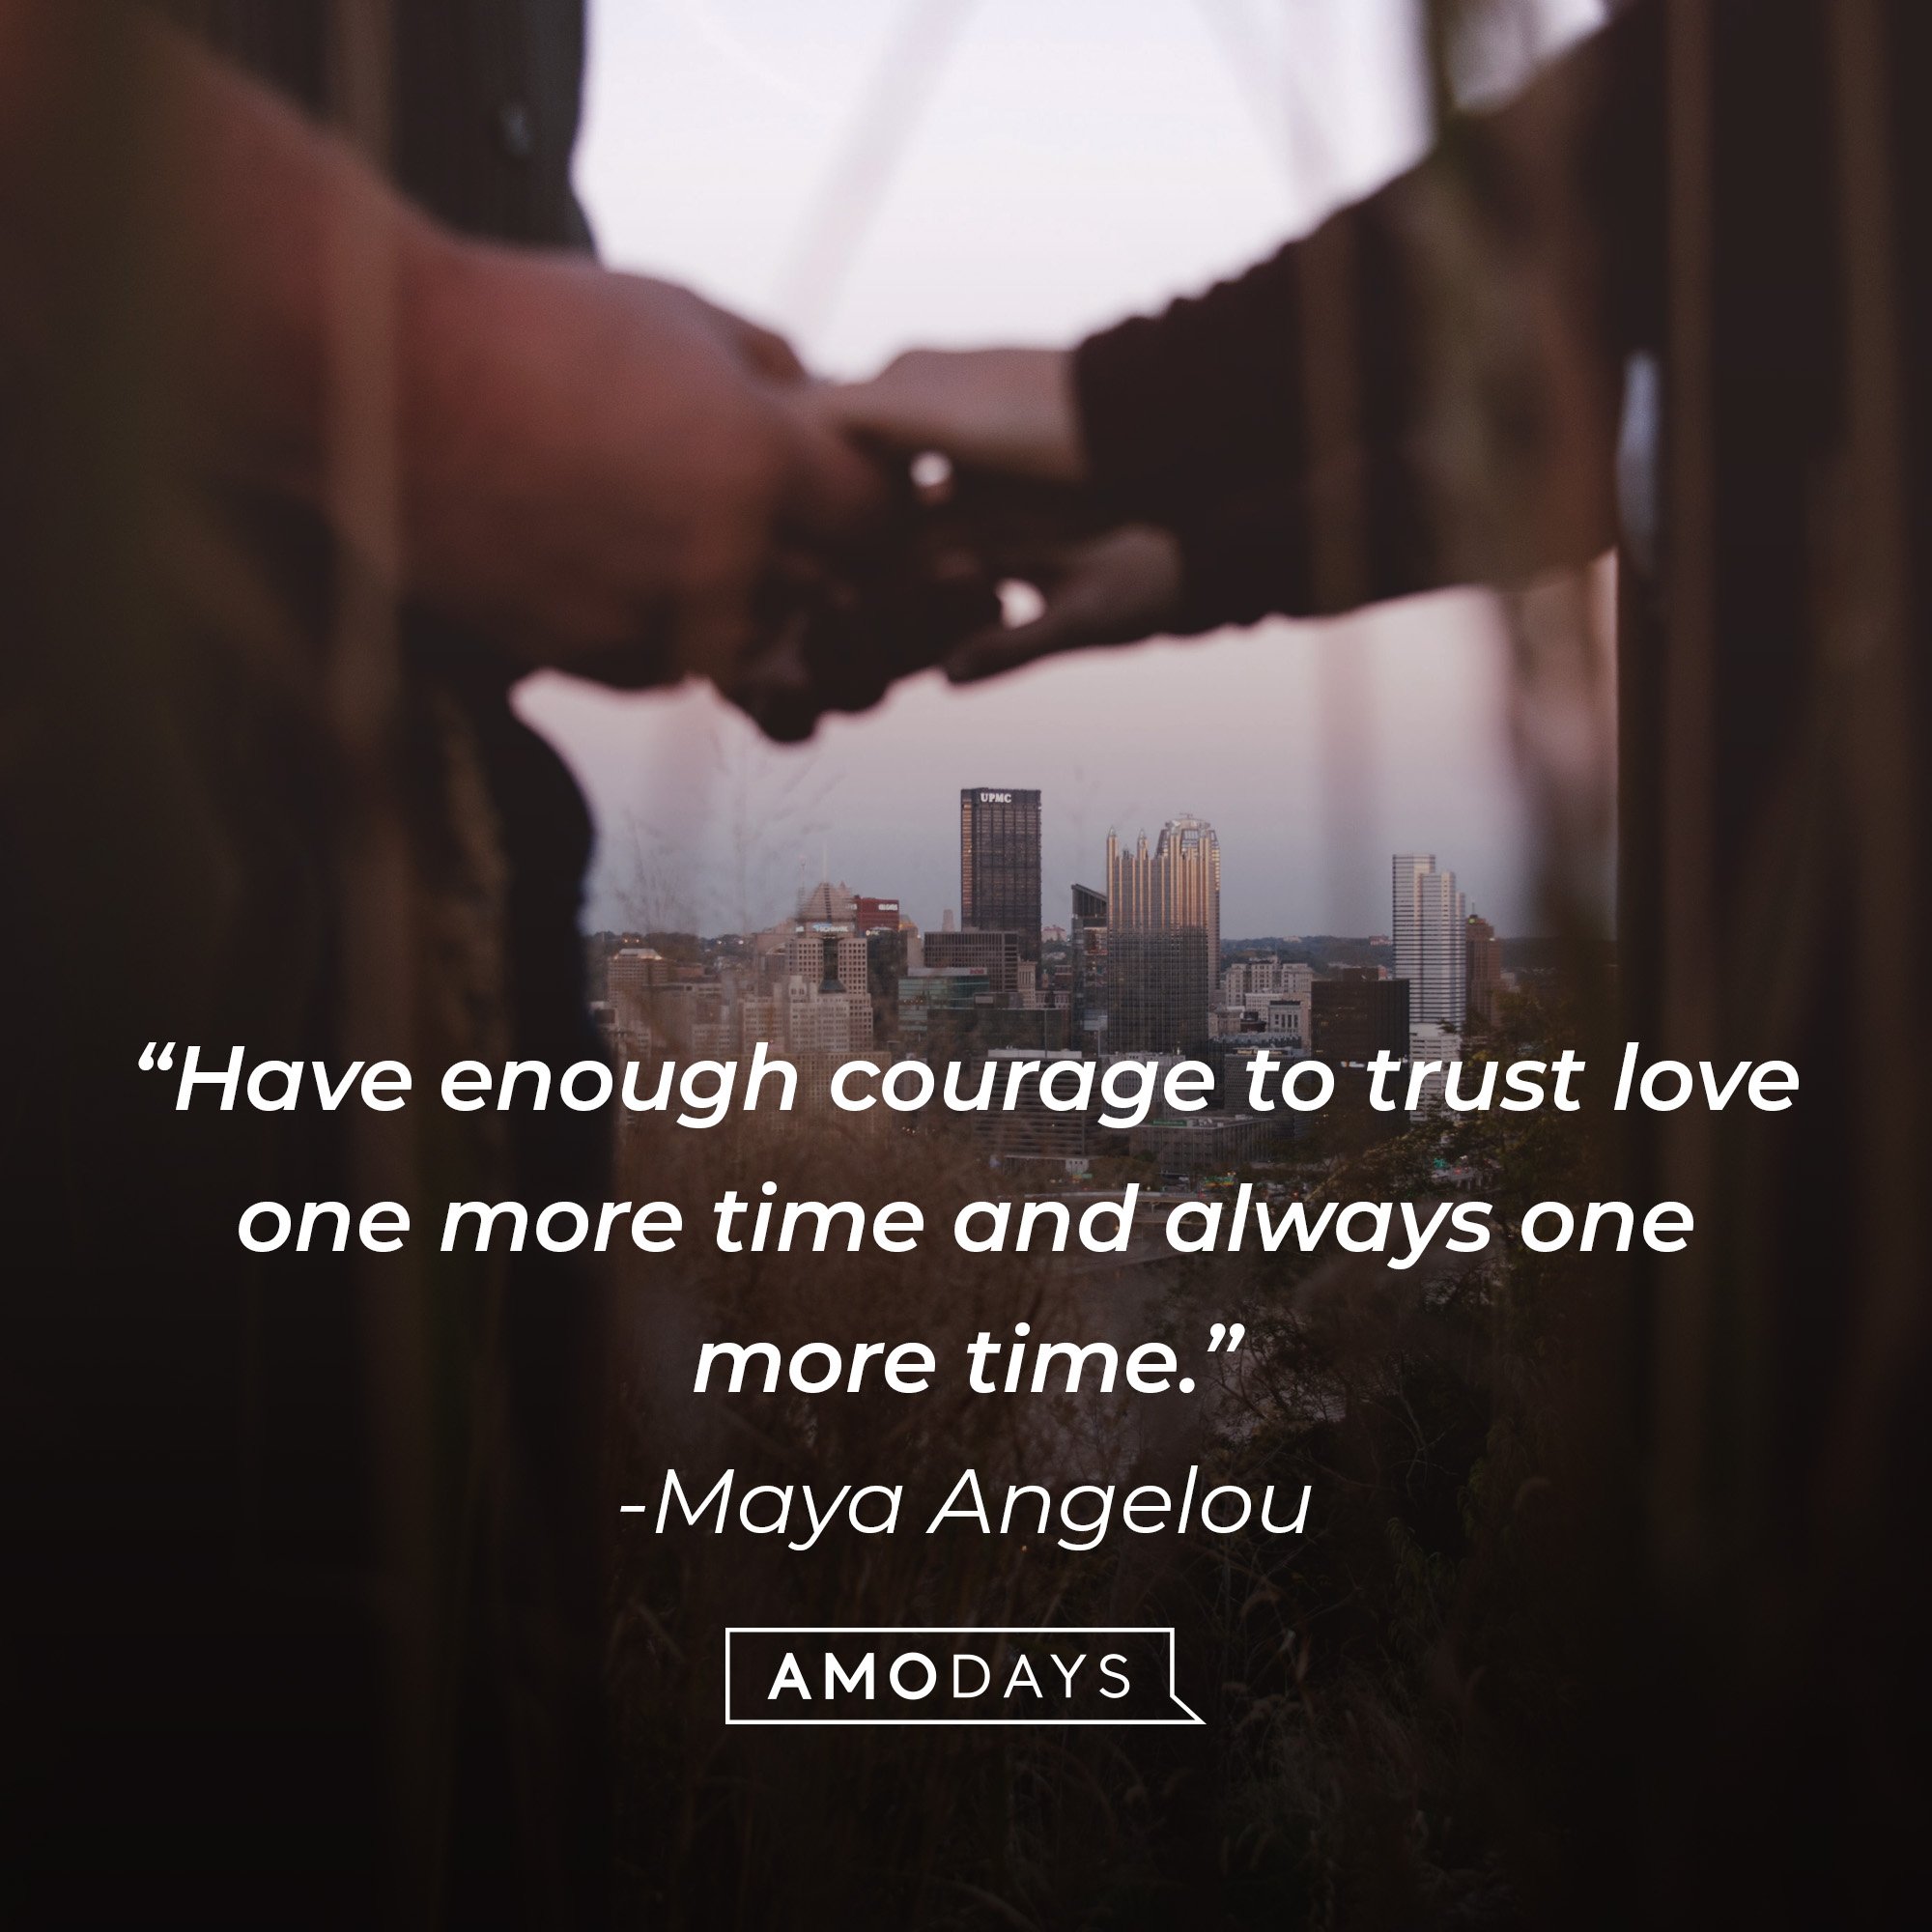 Maya Angelou’s quote: “Have enough courage to trust love one more time and always one more time.” | Image: AmoDays